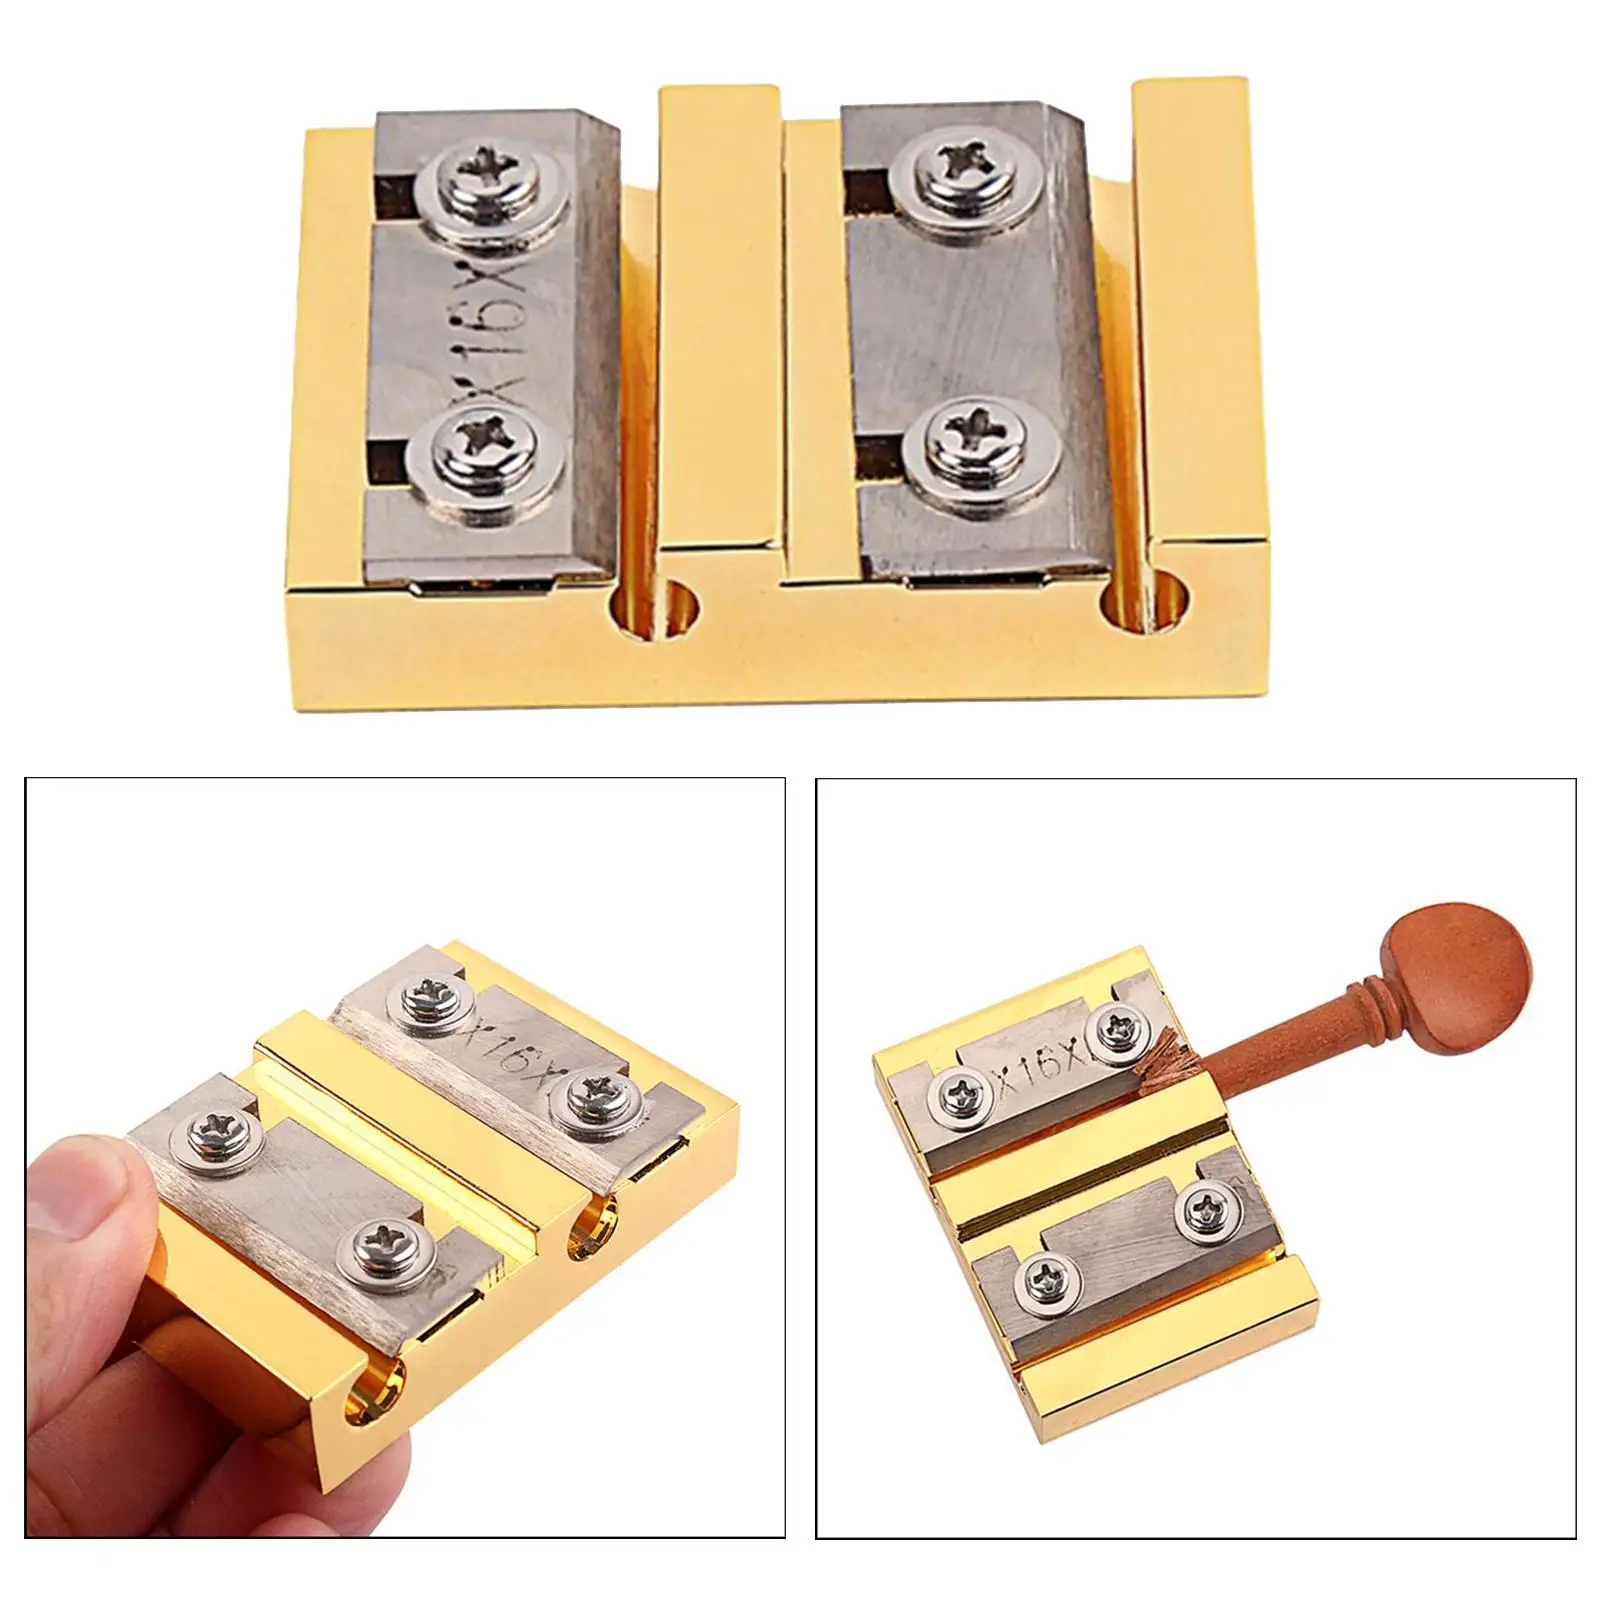 Violin Pegs Luthier Tool Pegs Accessories Installation Violin making tool for Violin Maker